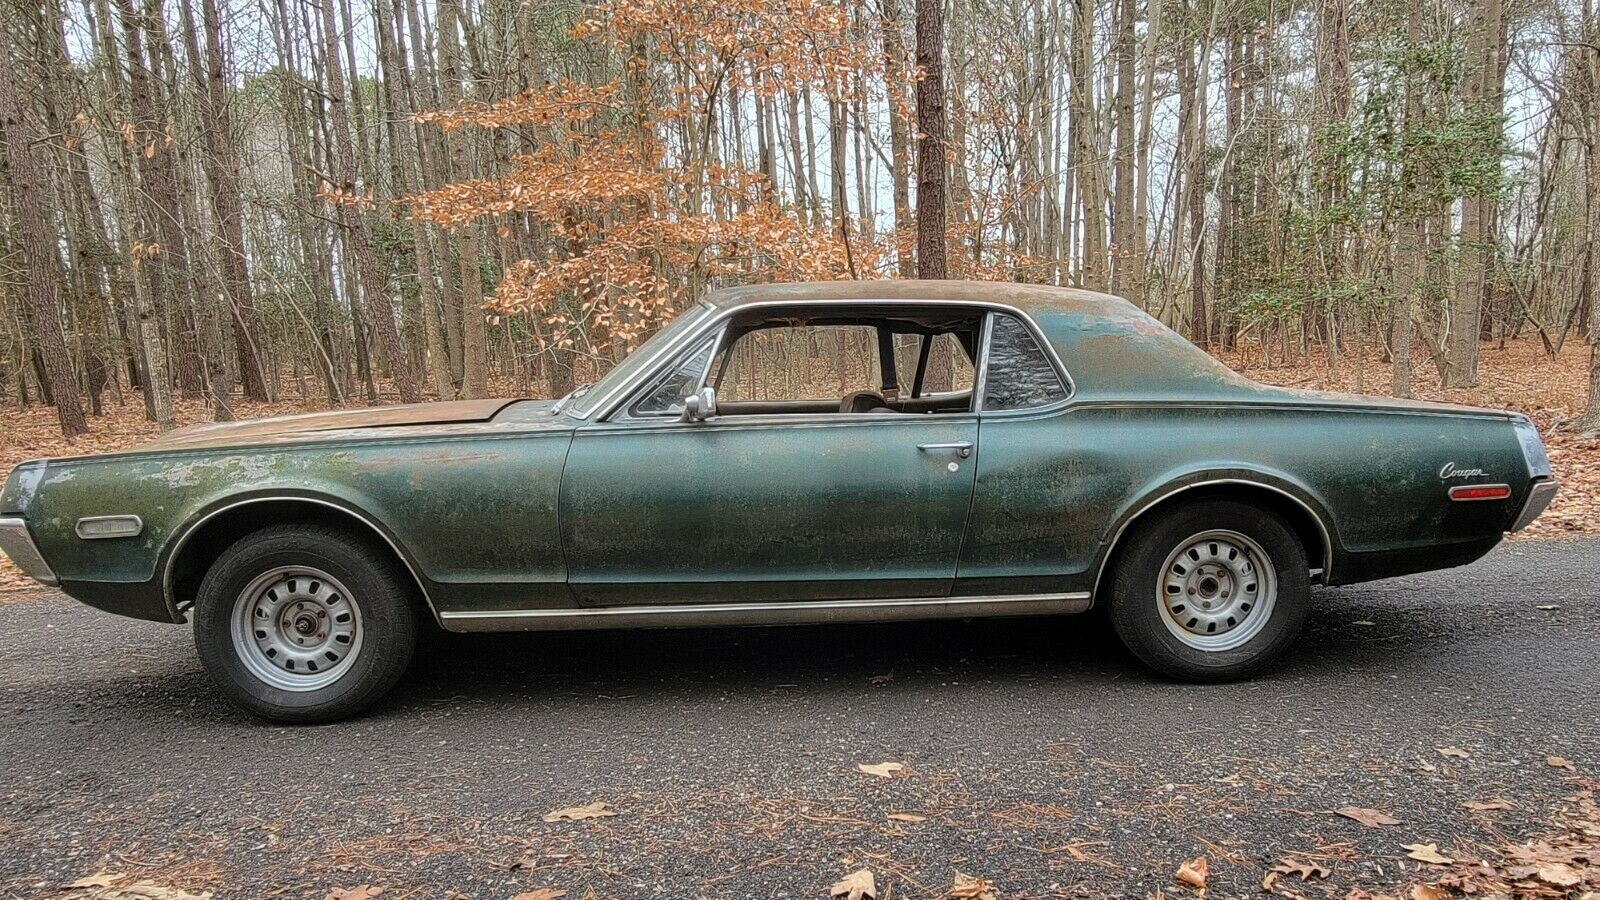 1968 Mercury Cougar Has Been Off the Streets for 30 Years, Needs Some TLC -  autoevolution